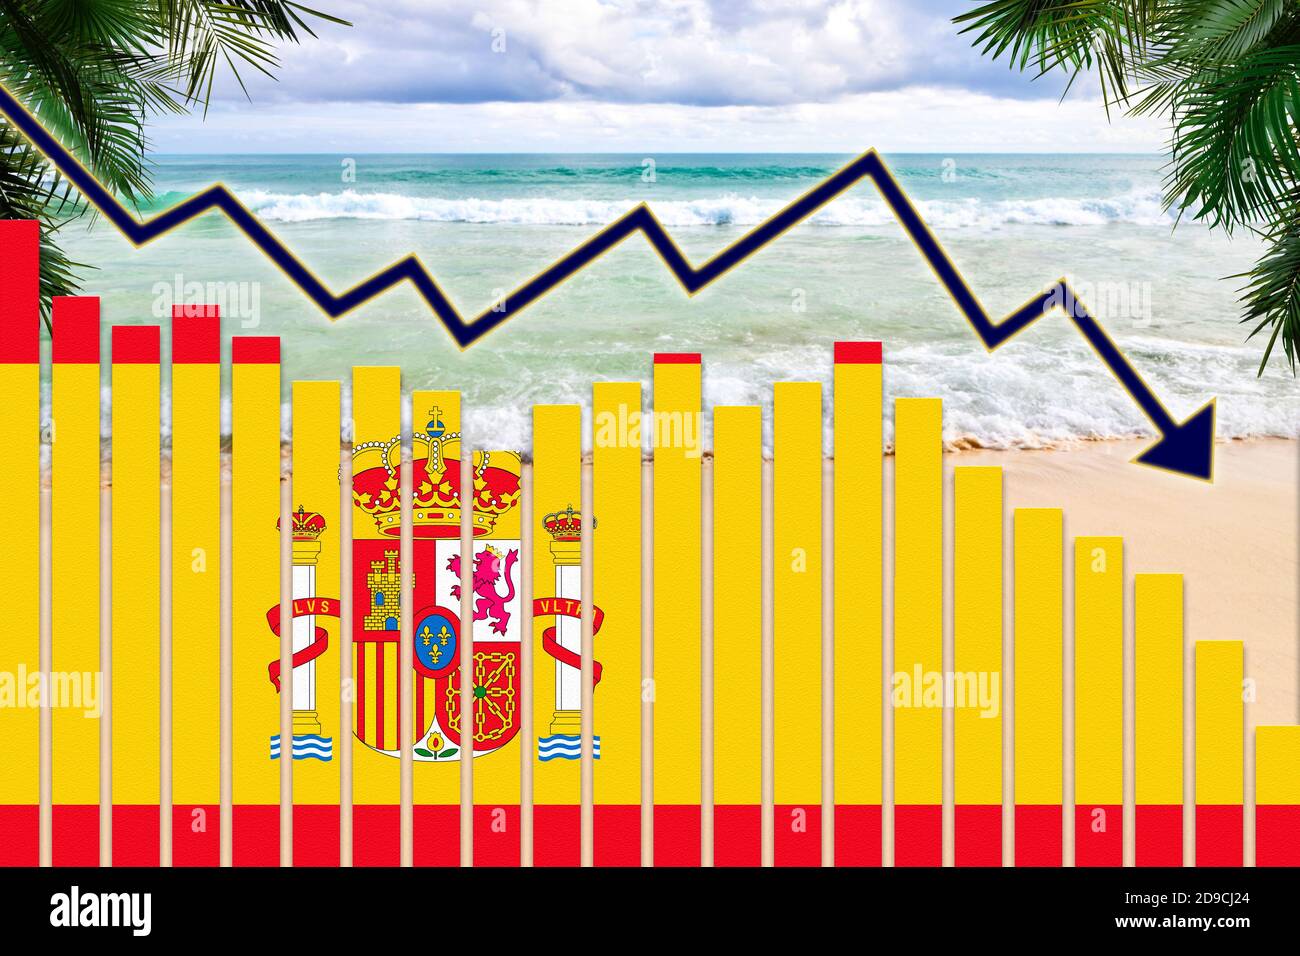 COVID-19 coronavirus pandemic impact on Spain tourism industry concept showing beach background with Spanish flag on bar charts declining trend. Stock Photo